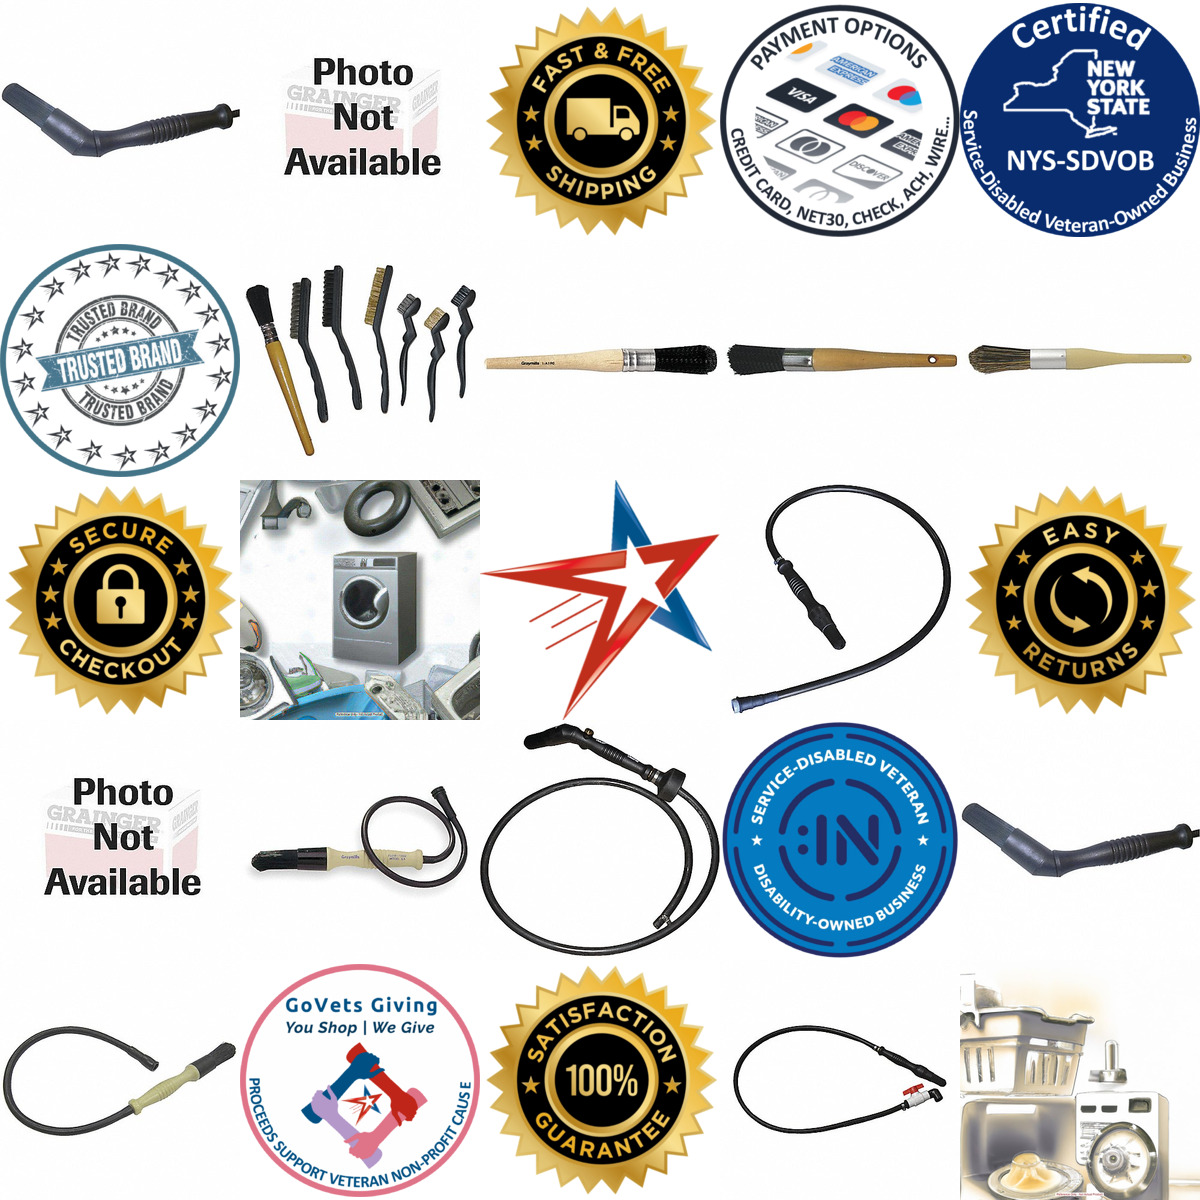 A selection of Parts Washer Brushes products on GoVets